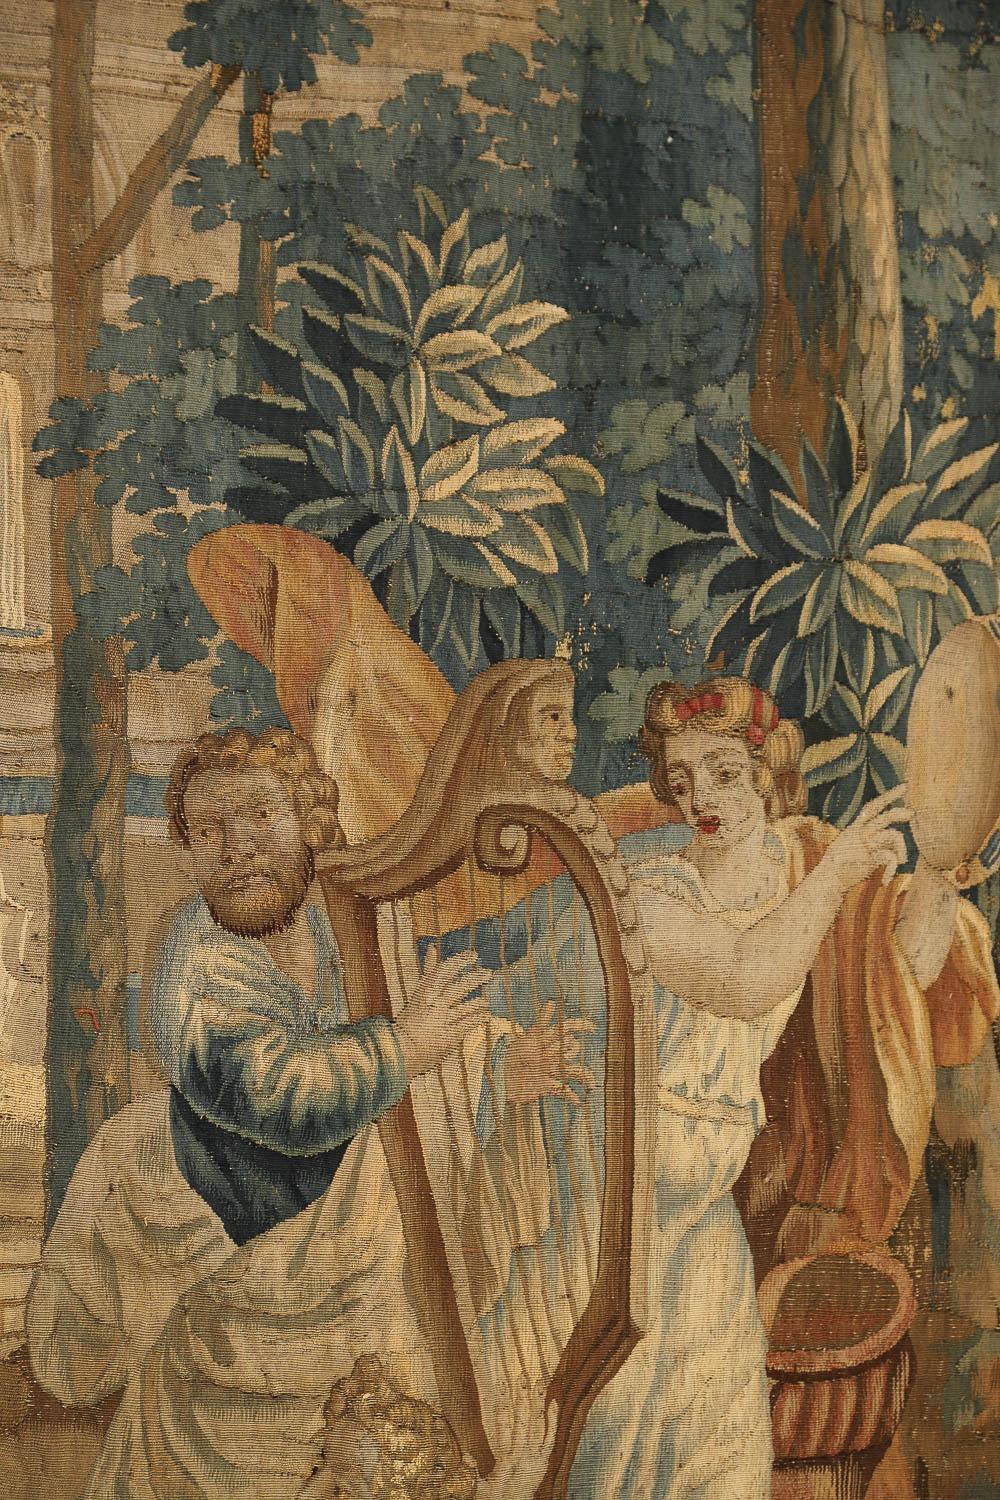 Flemish Verdure Tapestry with Classical Figures as Musicians, 17th Century.
Rectangular in shape, the colorful piece depicts an outdoor scene near a fountain with a man playing a harp while one woman plays a tambourine, and another woman lounges